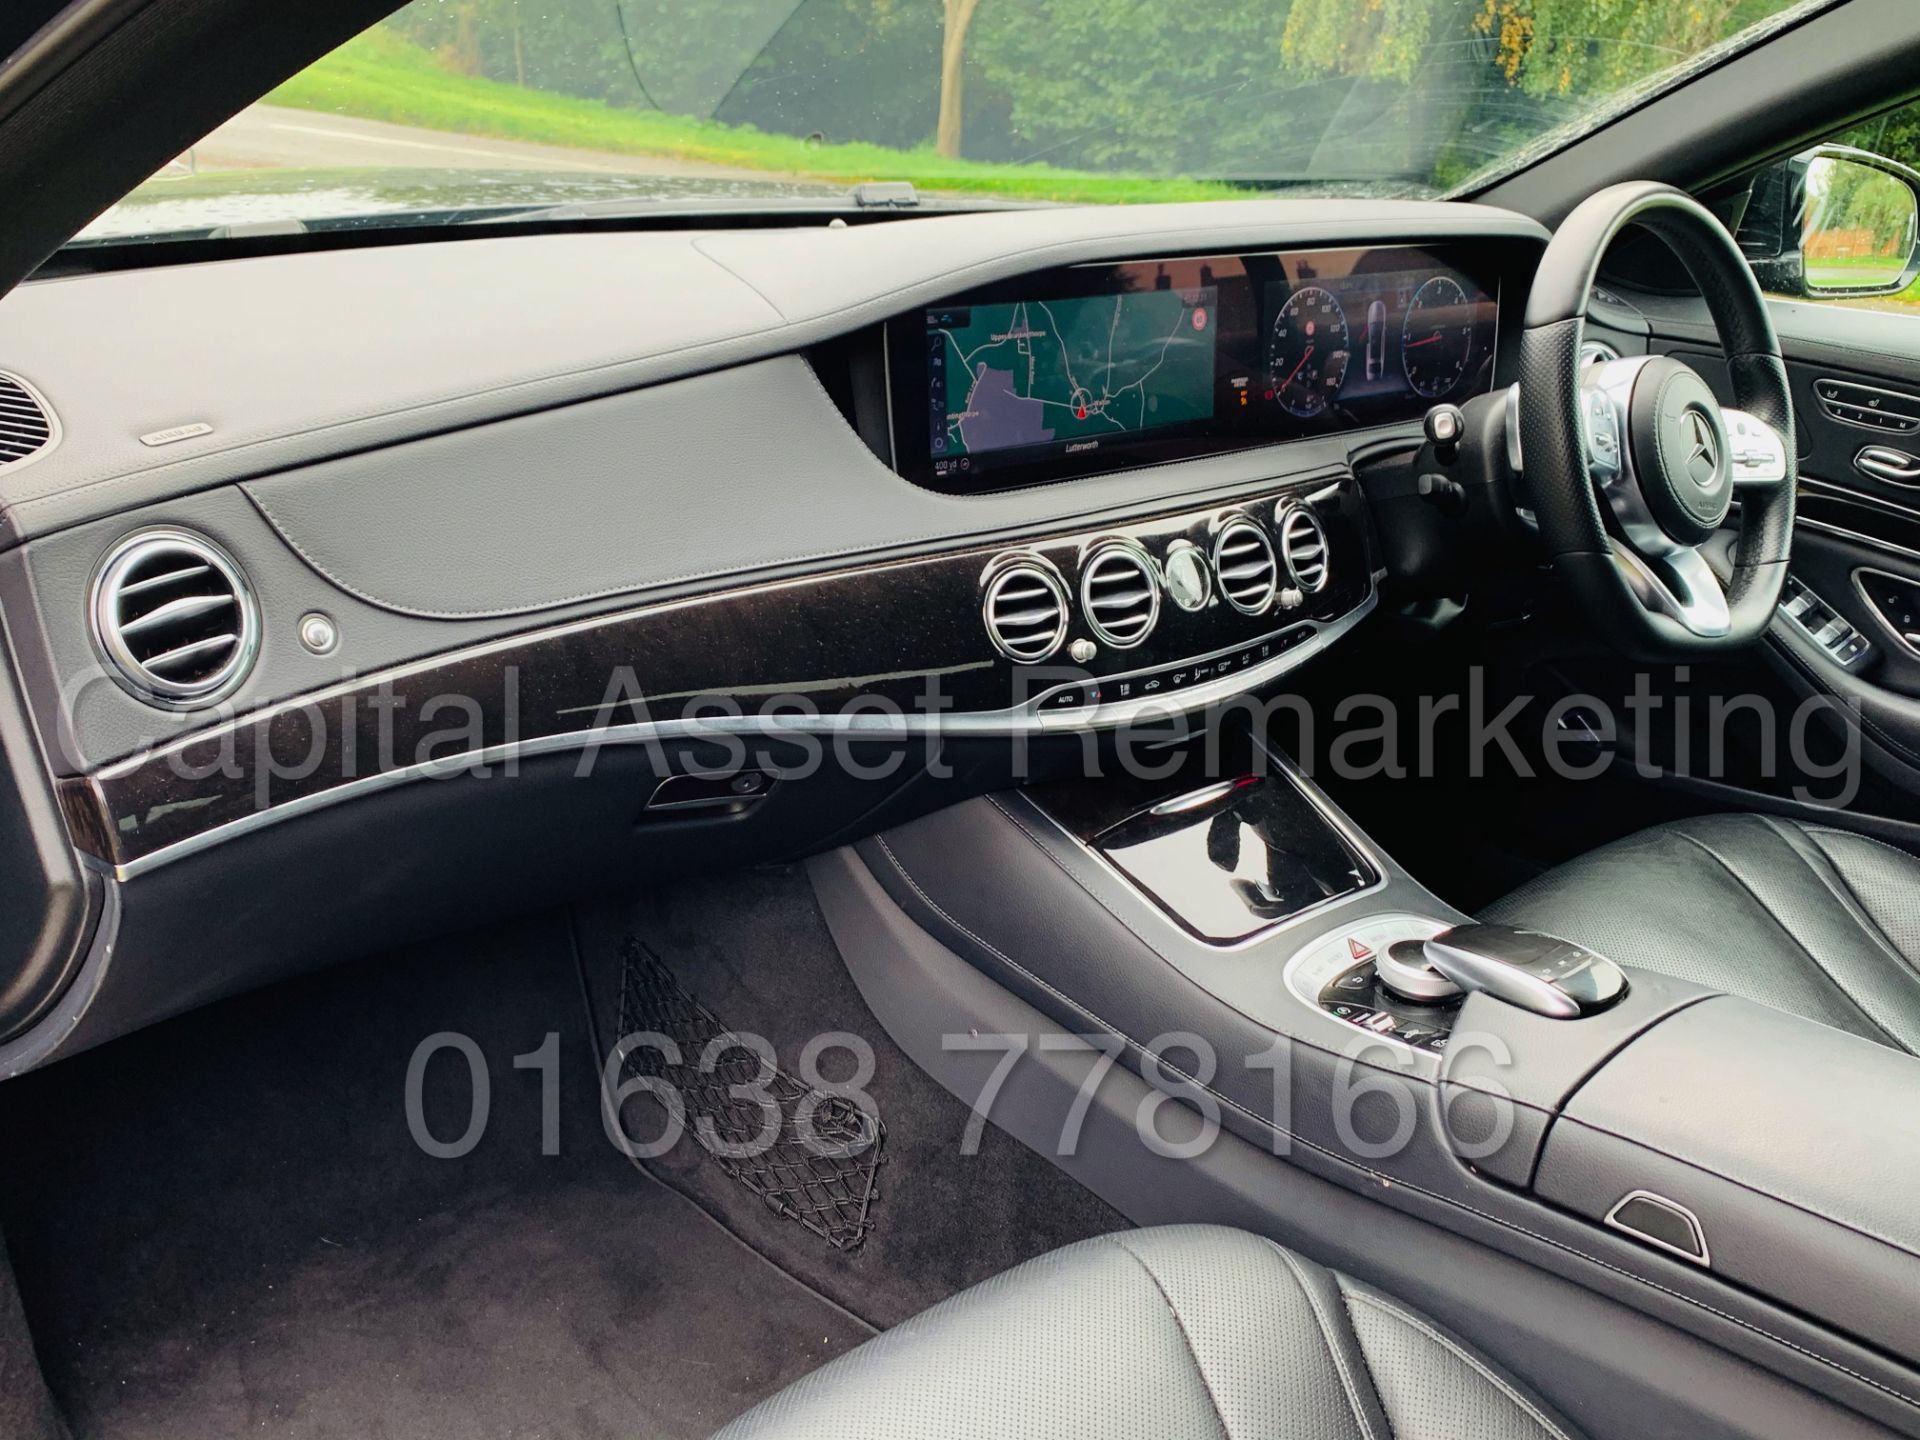 (ON SALE) MERCEDES-BENZ S350D *AMG LINE - SALOON* (2018) 9-G TRONIC - LEATHER - SAT NAV - Image 33 of 172